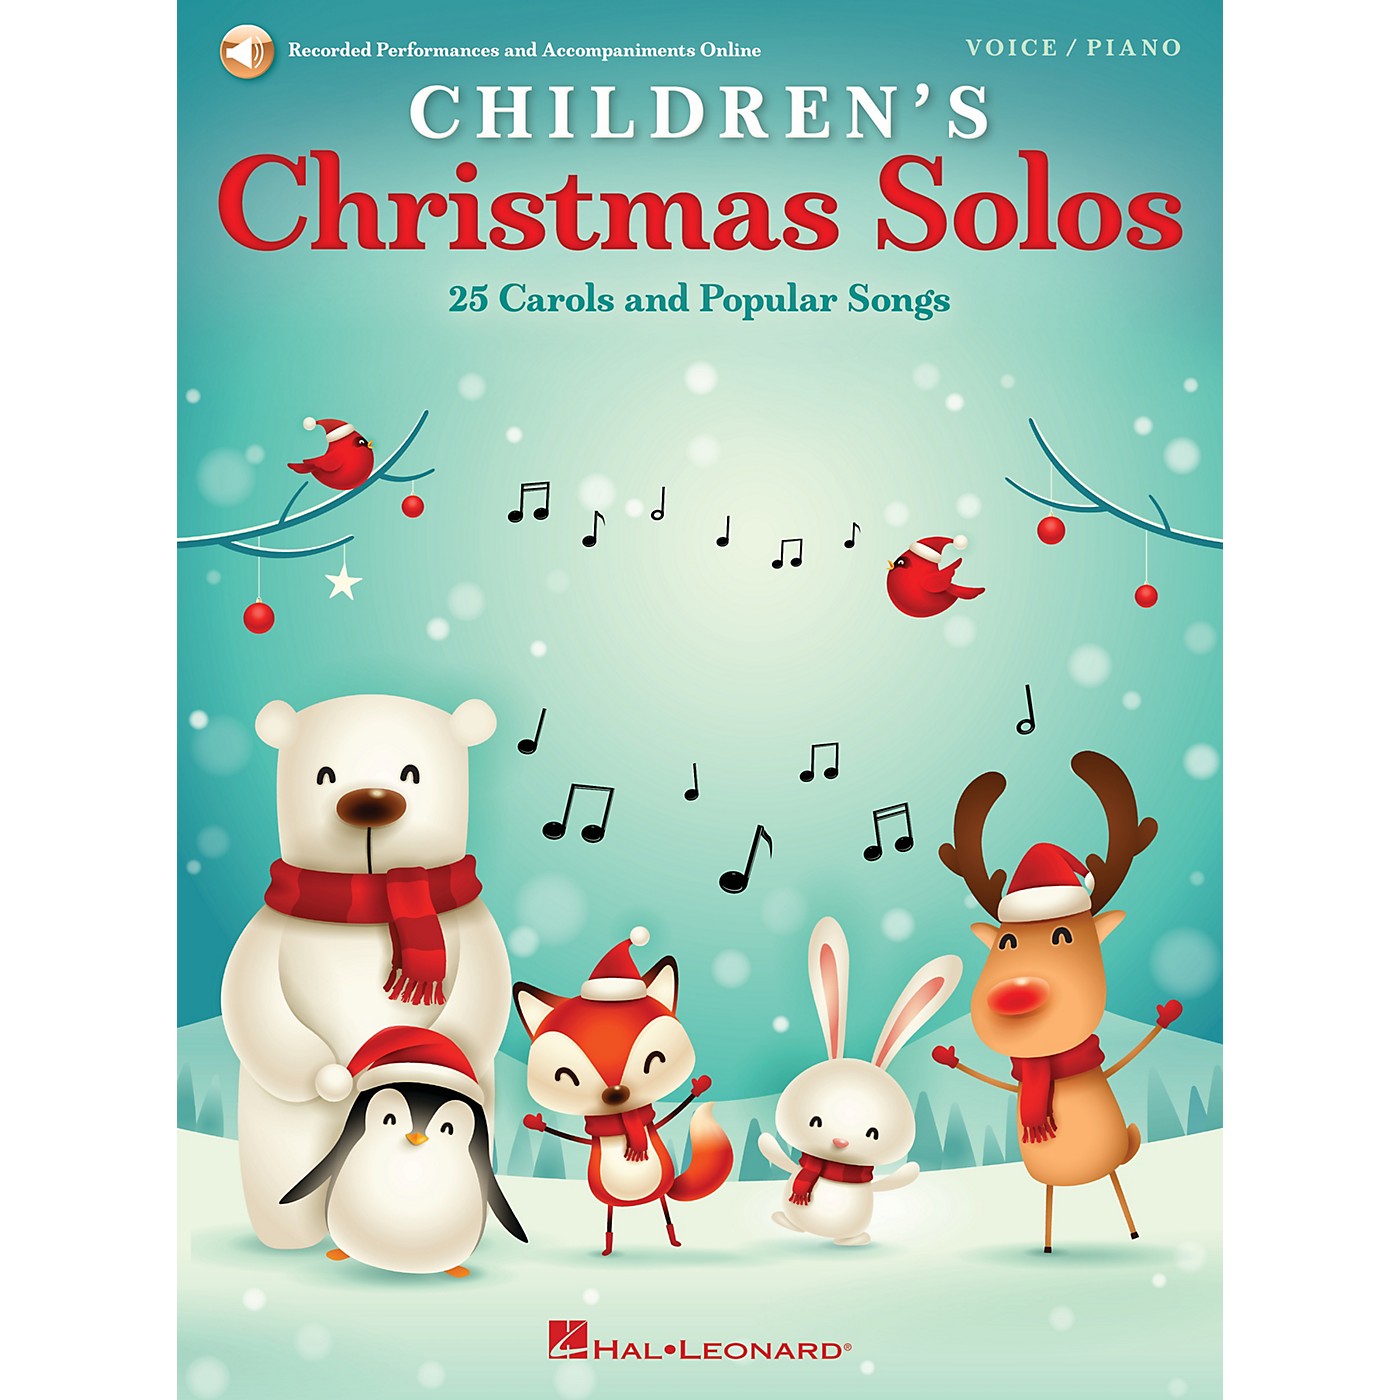 Hal Leonard Children's Christmas Solos (25 Carols and Popular Songs) Voice/Piano Book/Audio Online thumbnail